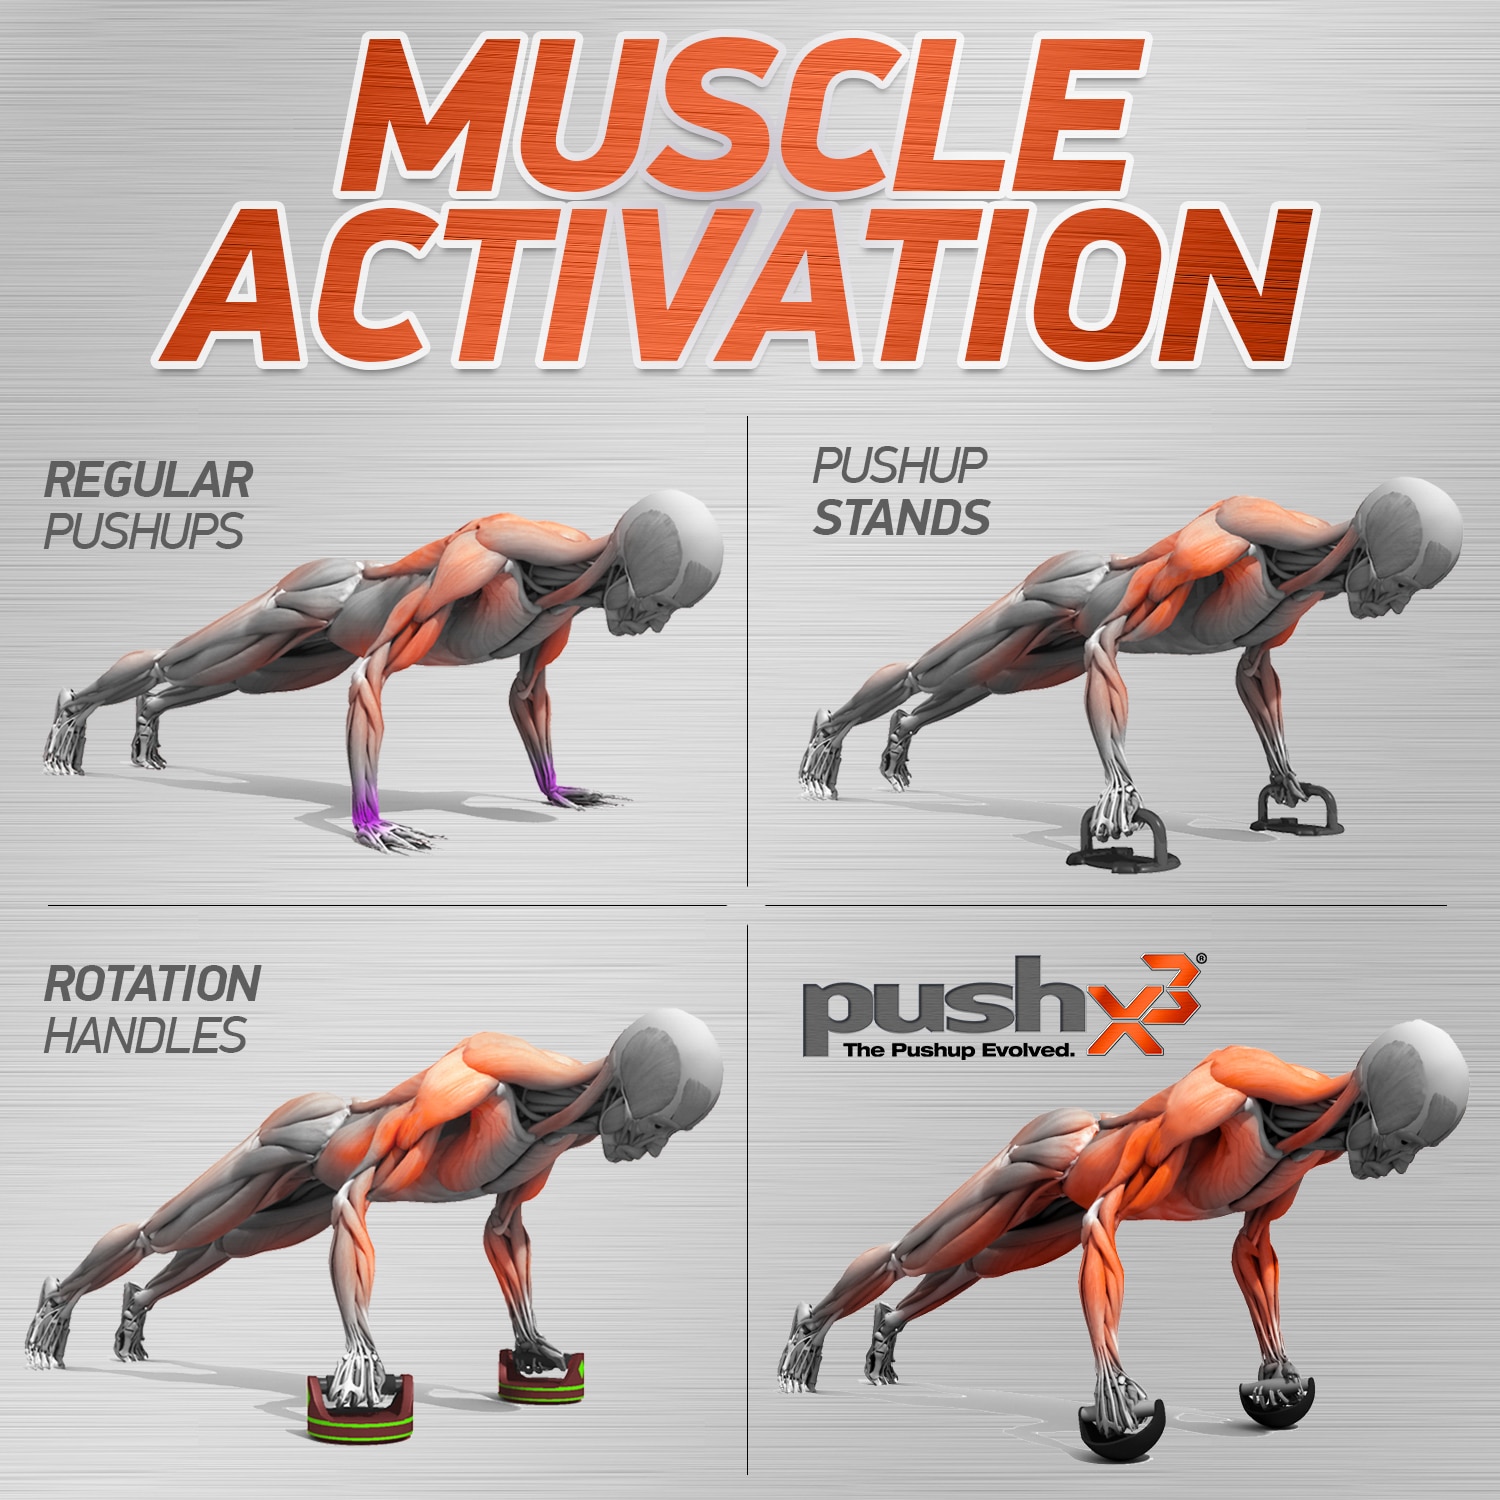 PushX3 - The Pushup Evolved. - PushX3